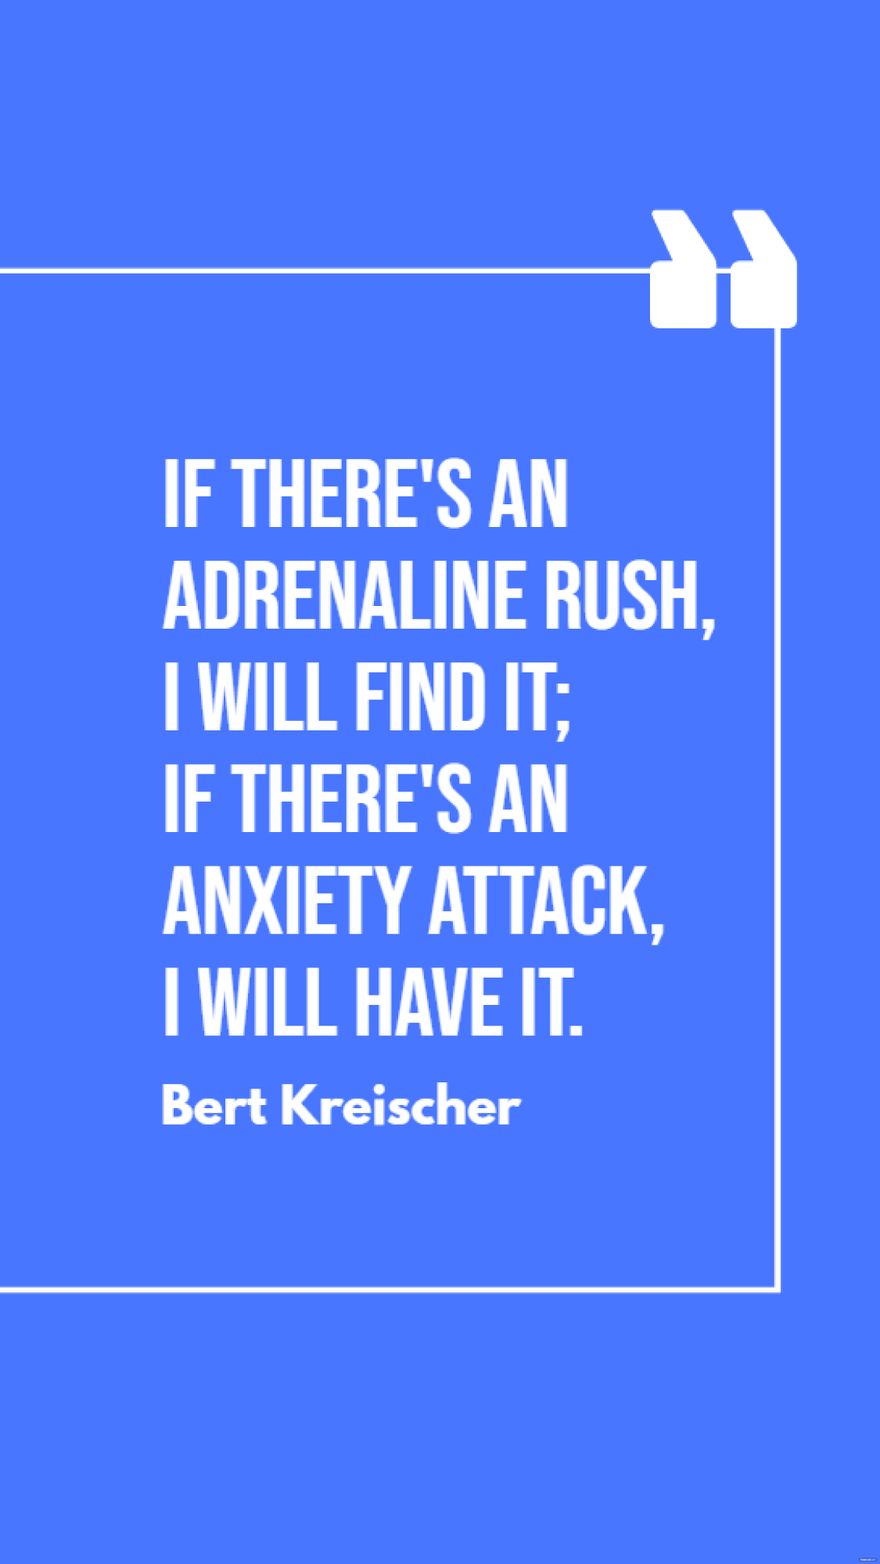 Free Bert Kreischer - If there's an adrenaline rush, I will find it; if there's an anxiety attack, I will have it. in JPG